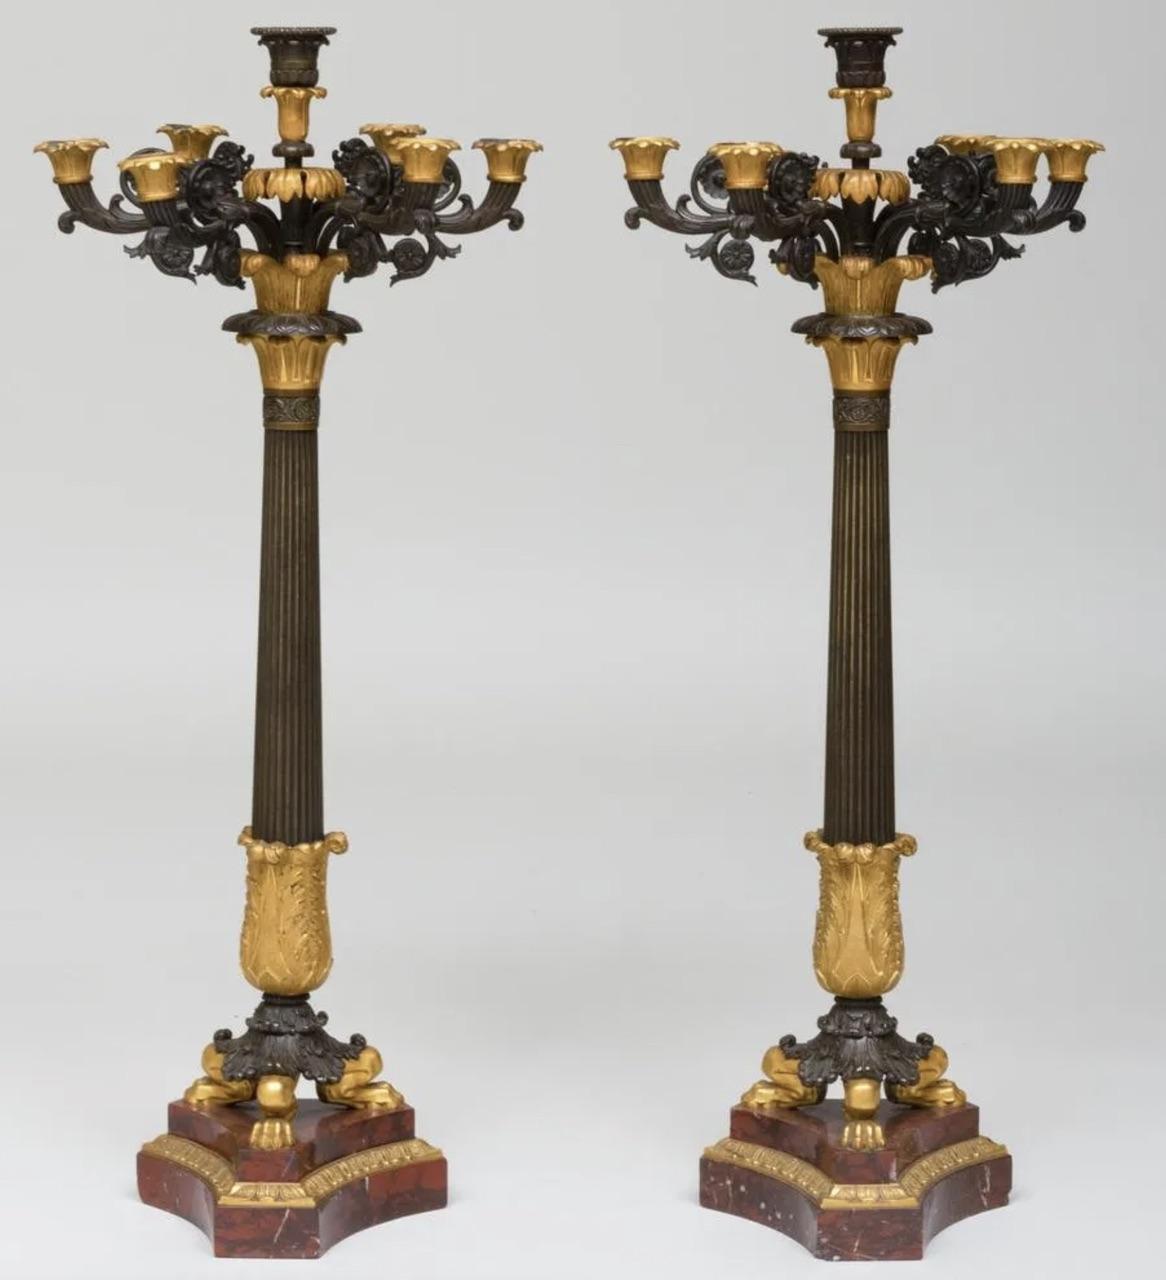 Fine pair of large Charles X ormolu and patinated-bronze seven-light candelabra on marble bases.